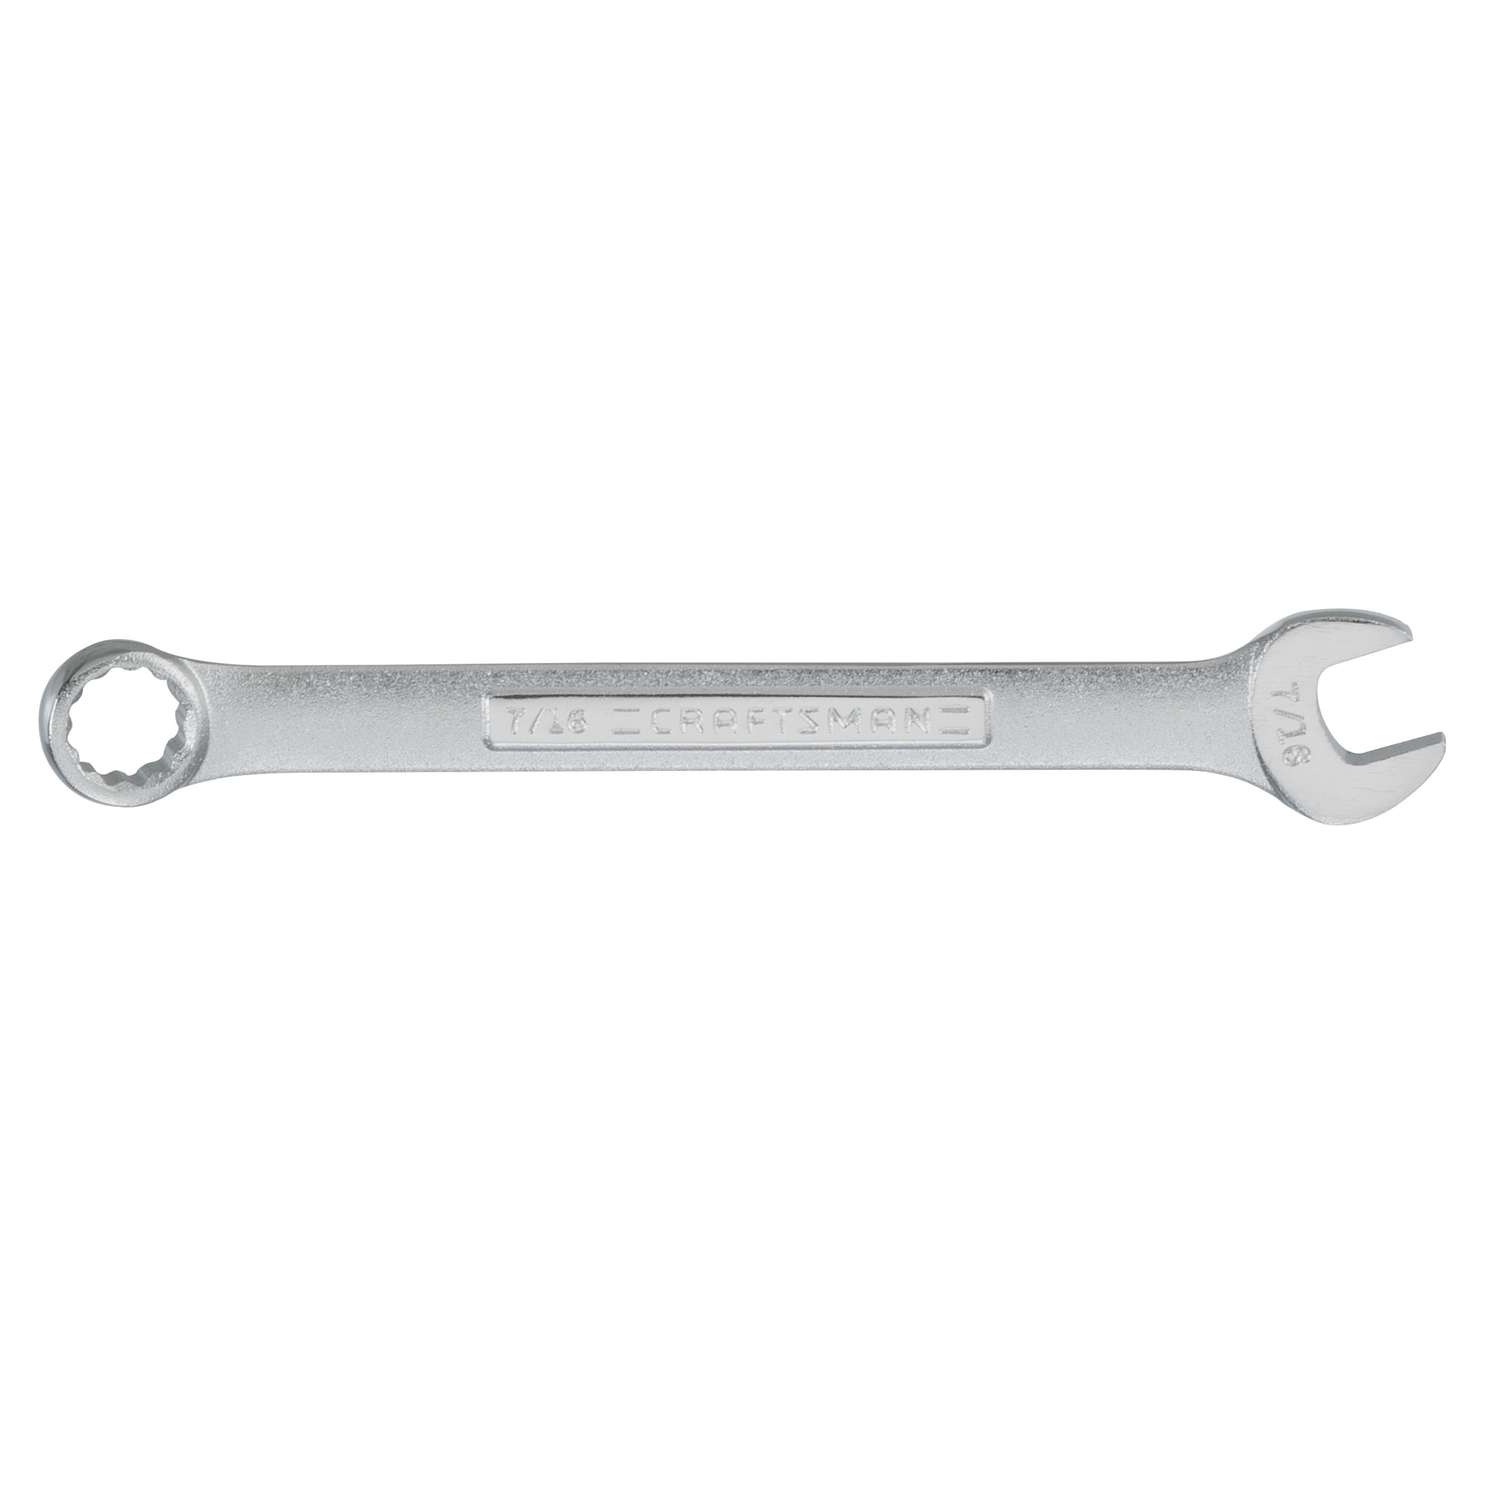 HHIP 7023-1025 1-5/8 Combination Wrench